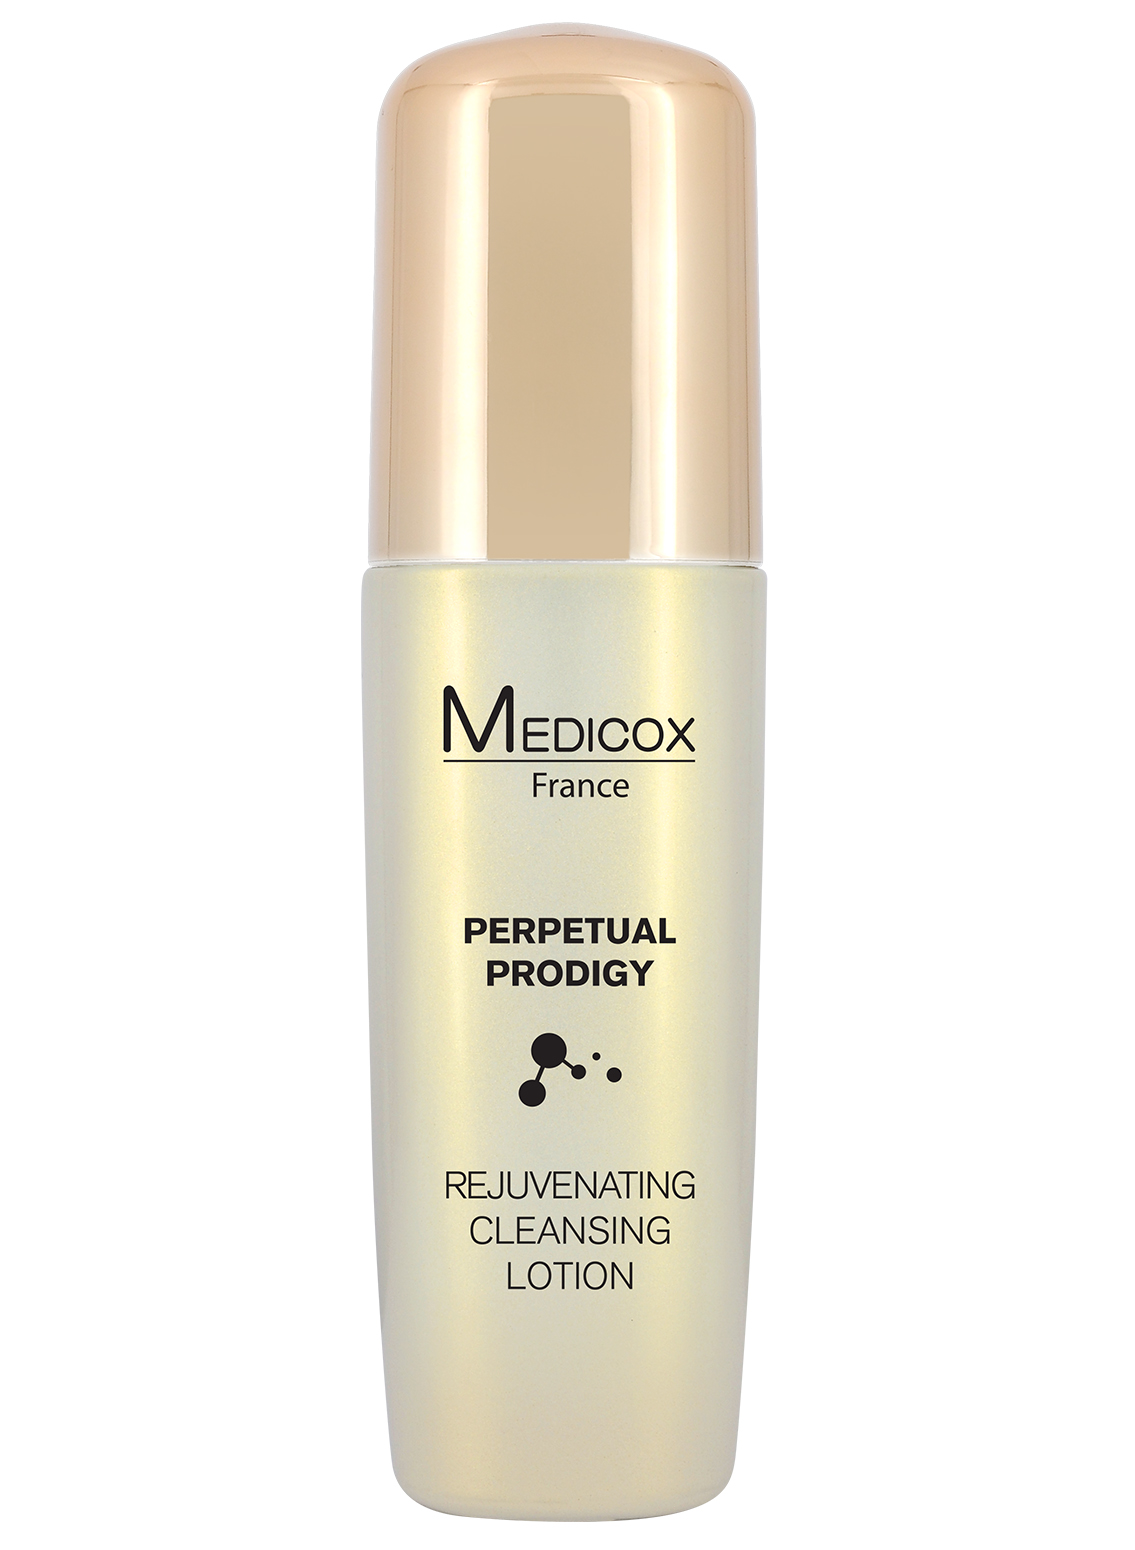 Perpetual Prodigy Rejuvenating Cleansing Lotion